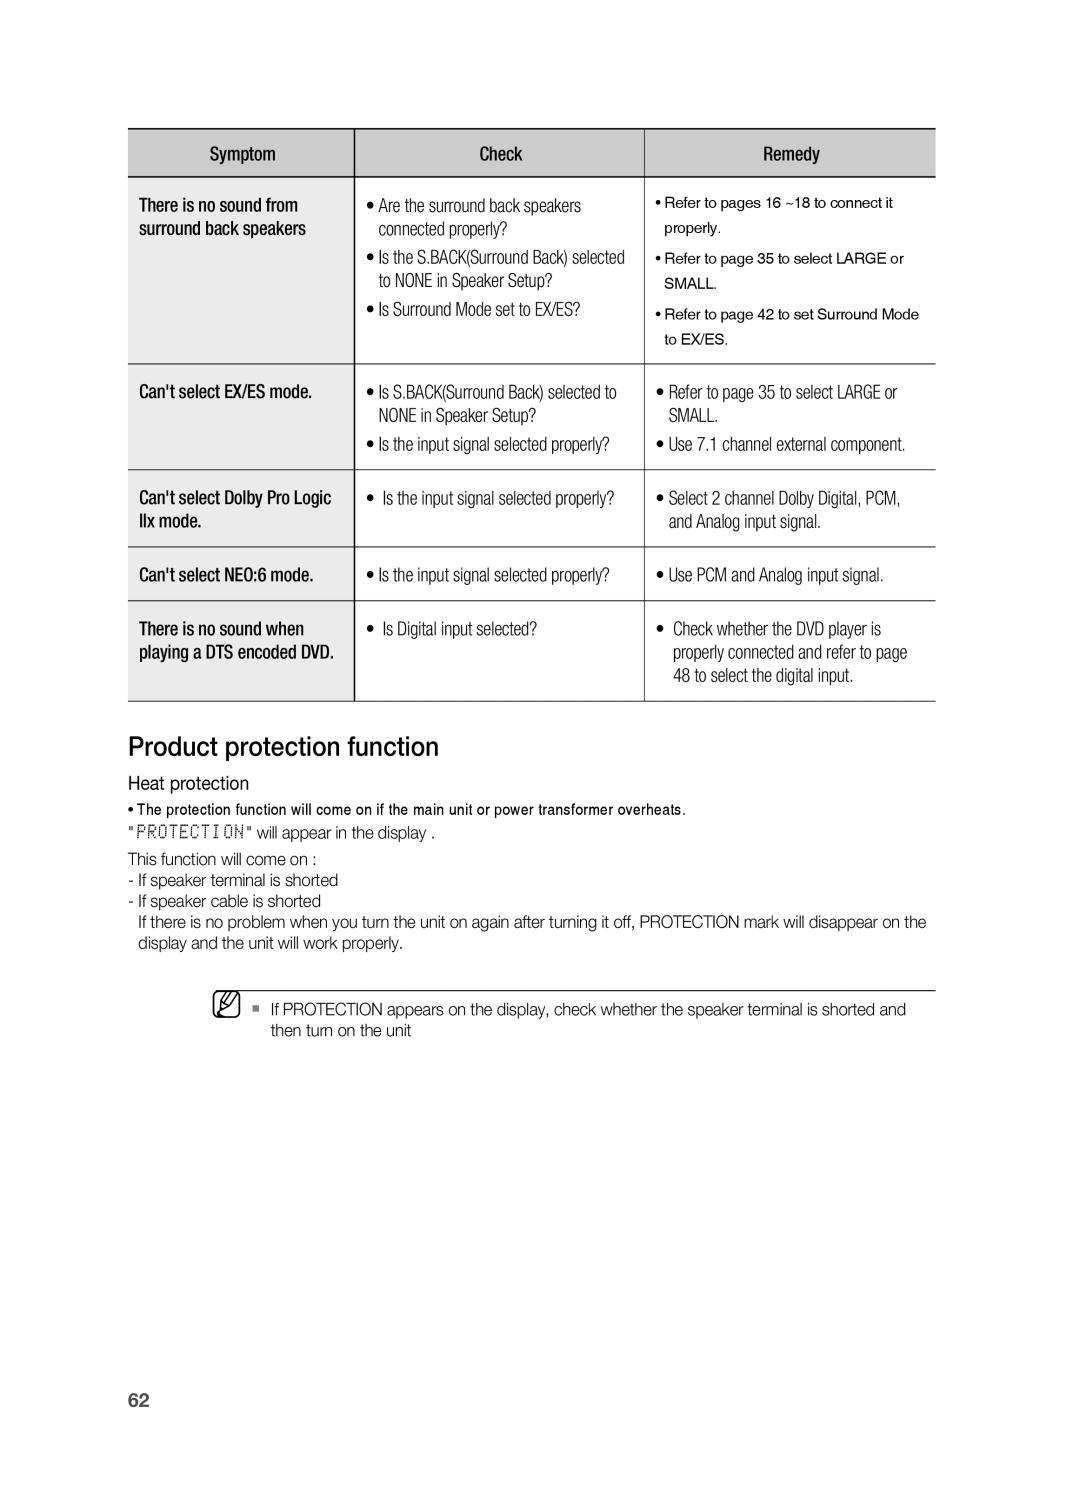 Samsung HT-AS730S user manual Product protection function 